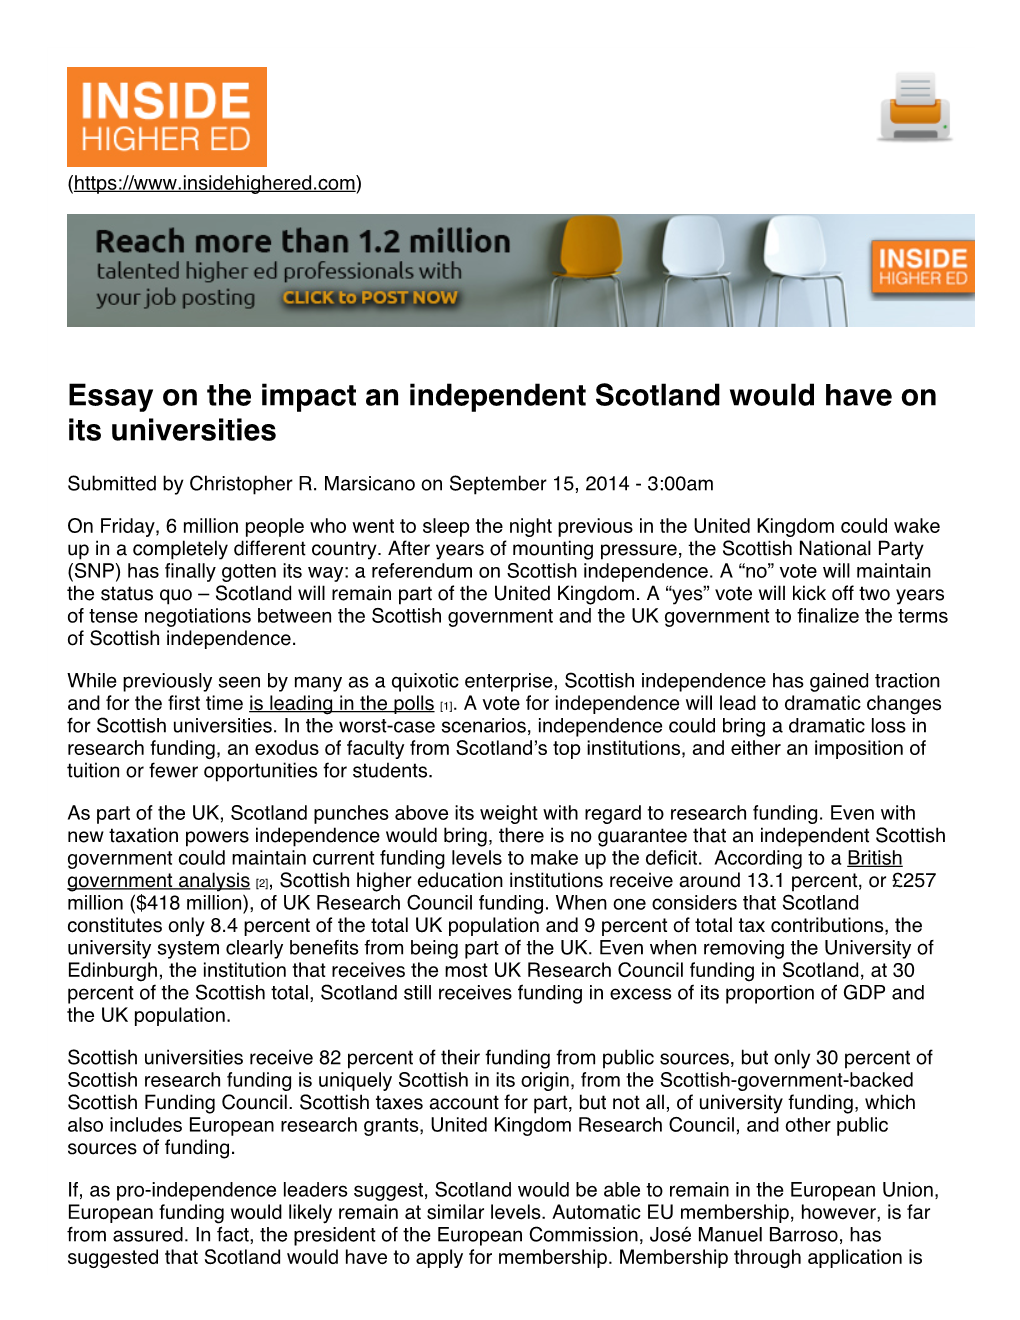 Essay on the Impact an Independent Scotland Would Have on Its Universities